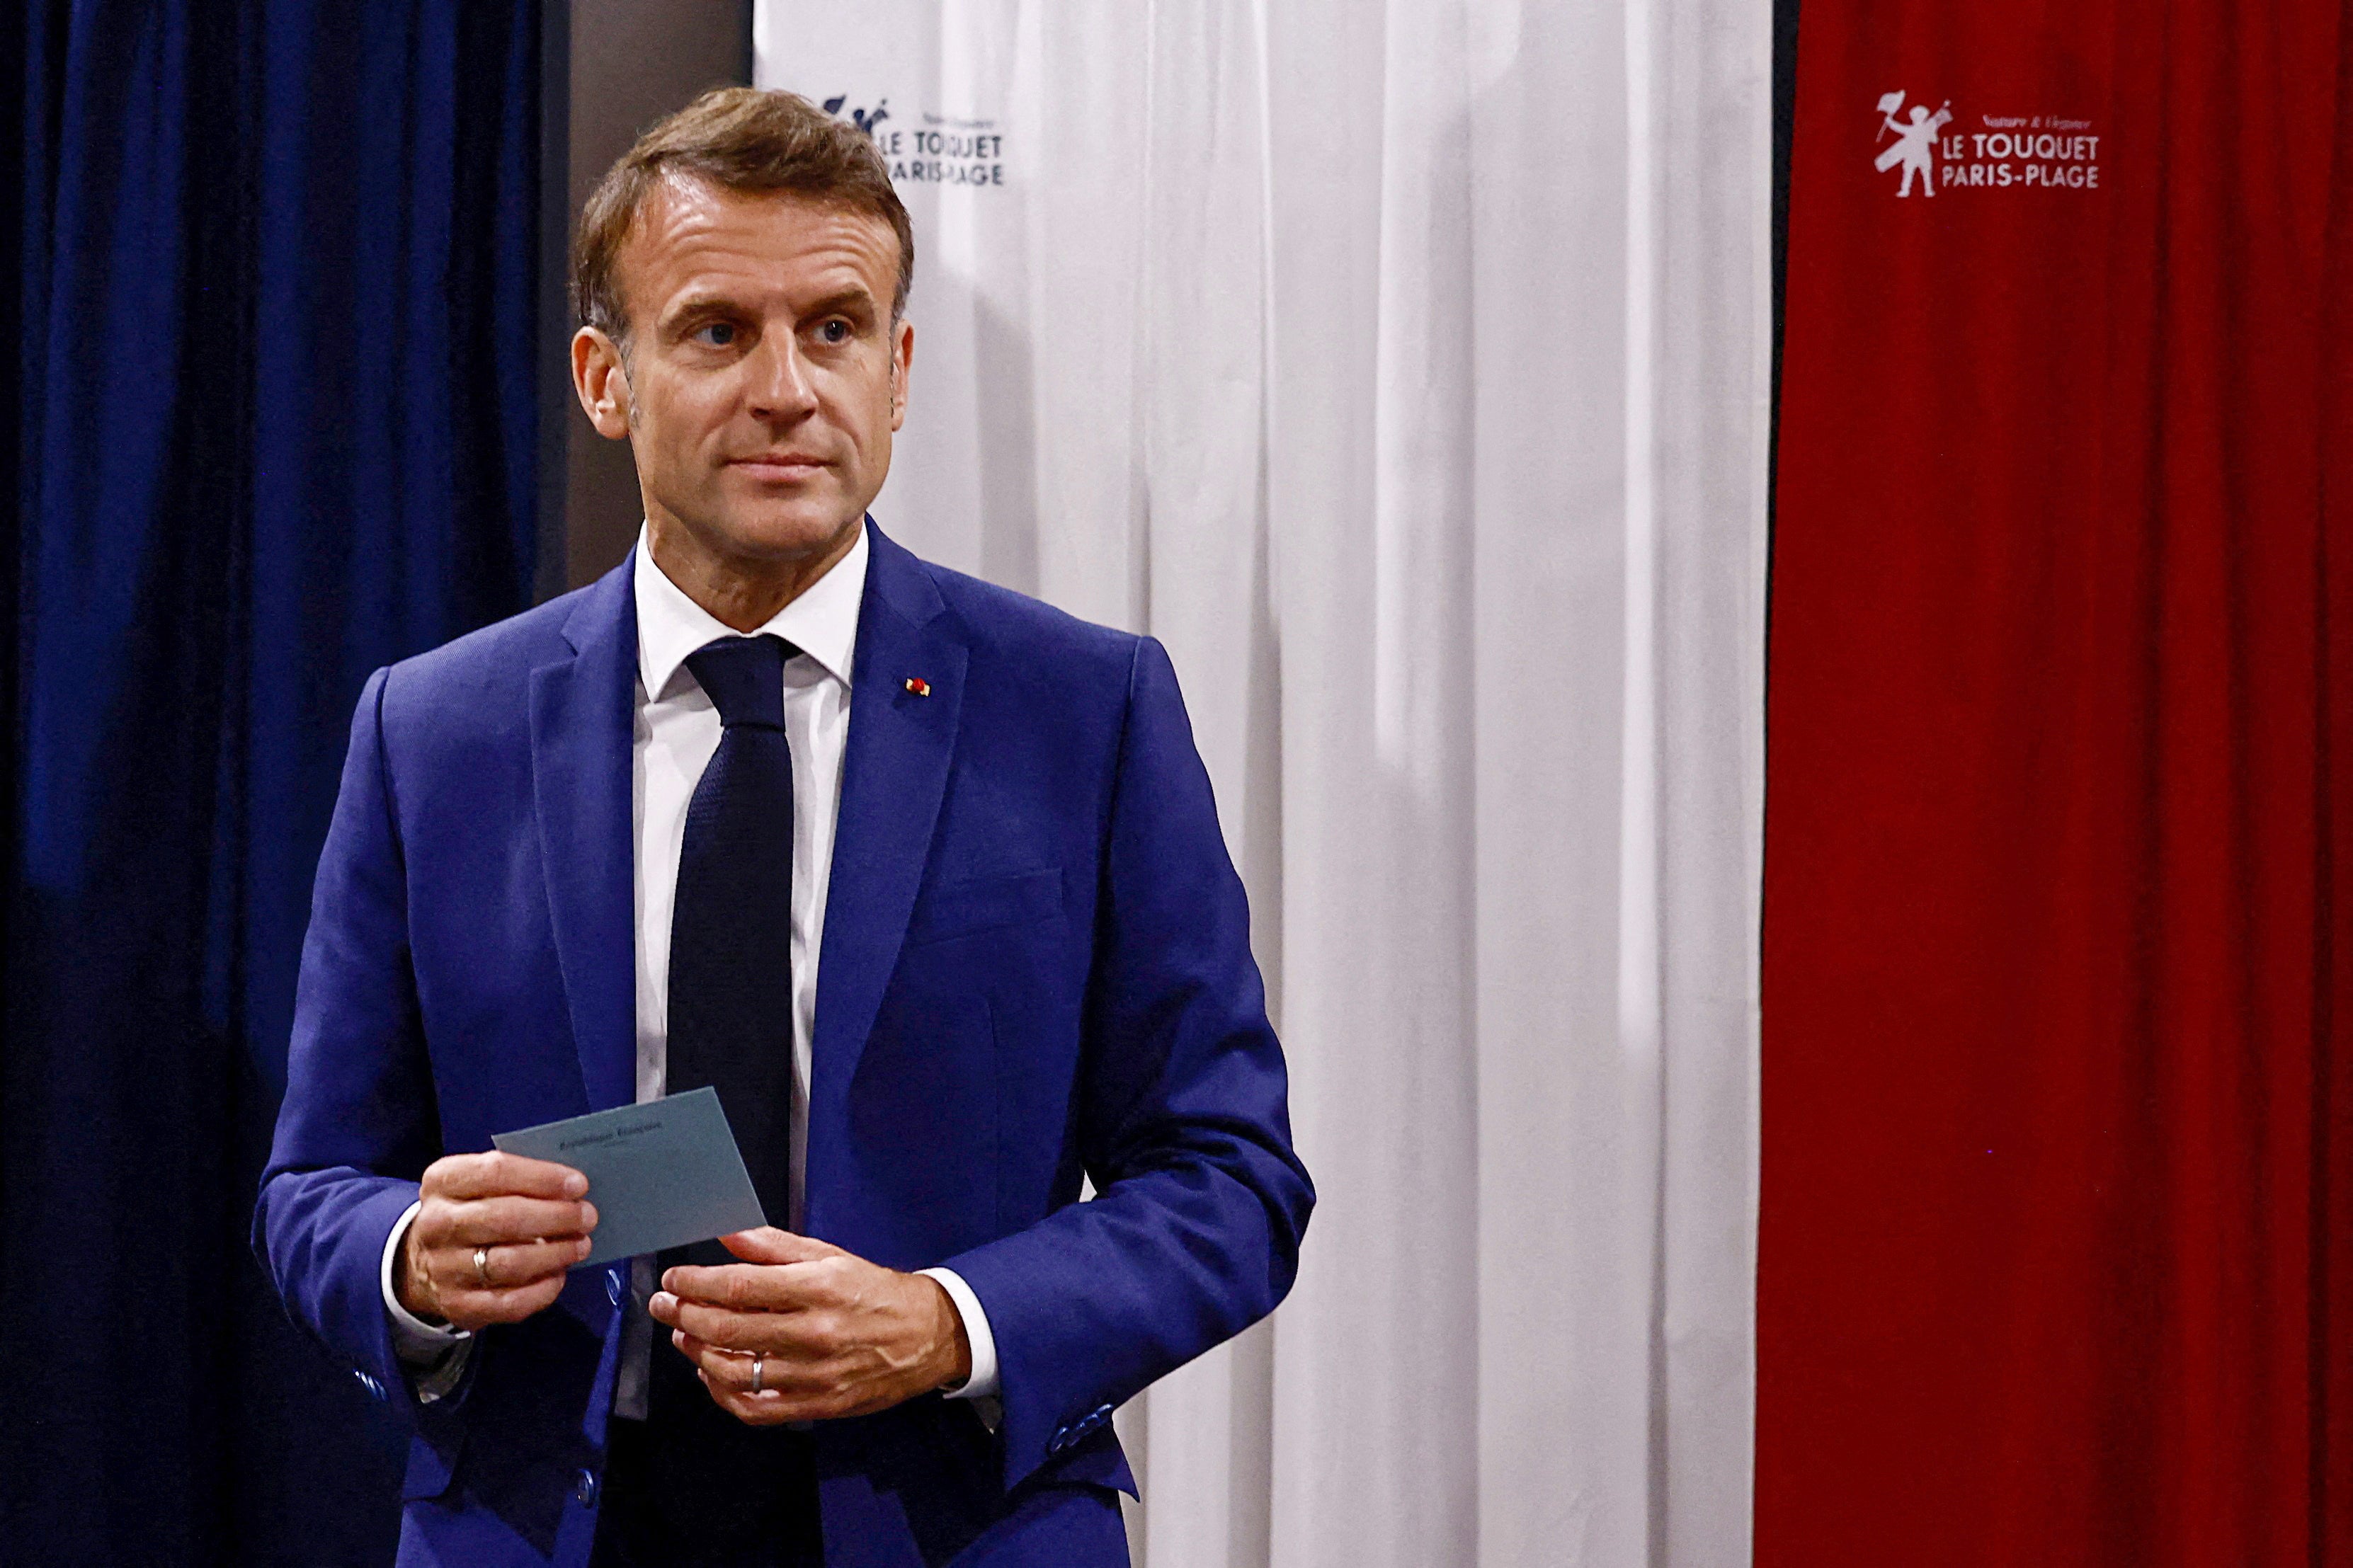 France's President Emmanuel Macron leaves the polling booth prior to cast his vote in the first round of parliamentary elections at a polling station in Le Touquet, northern France